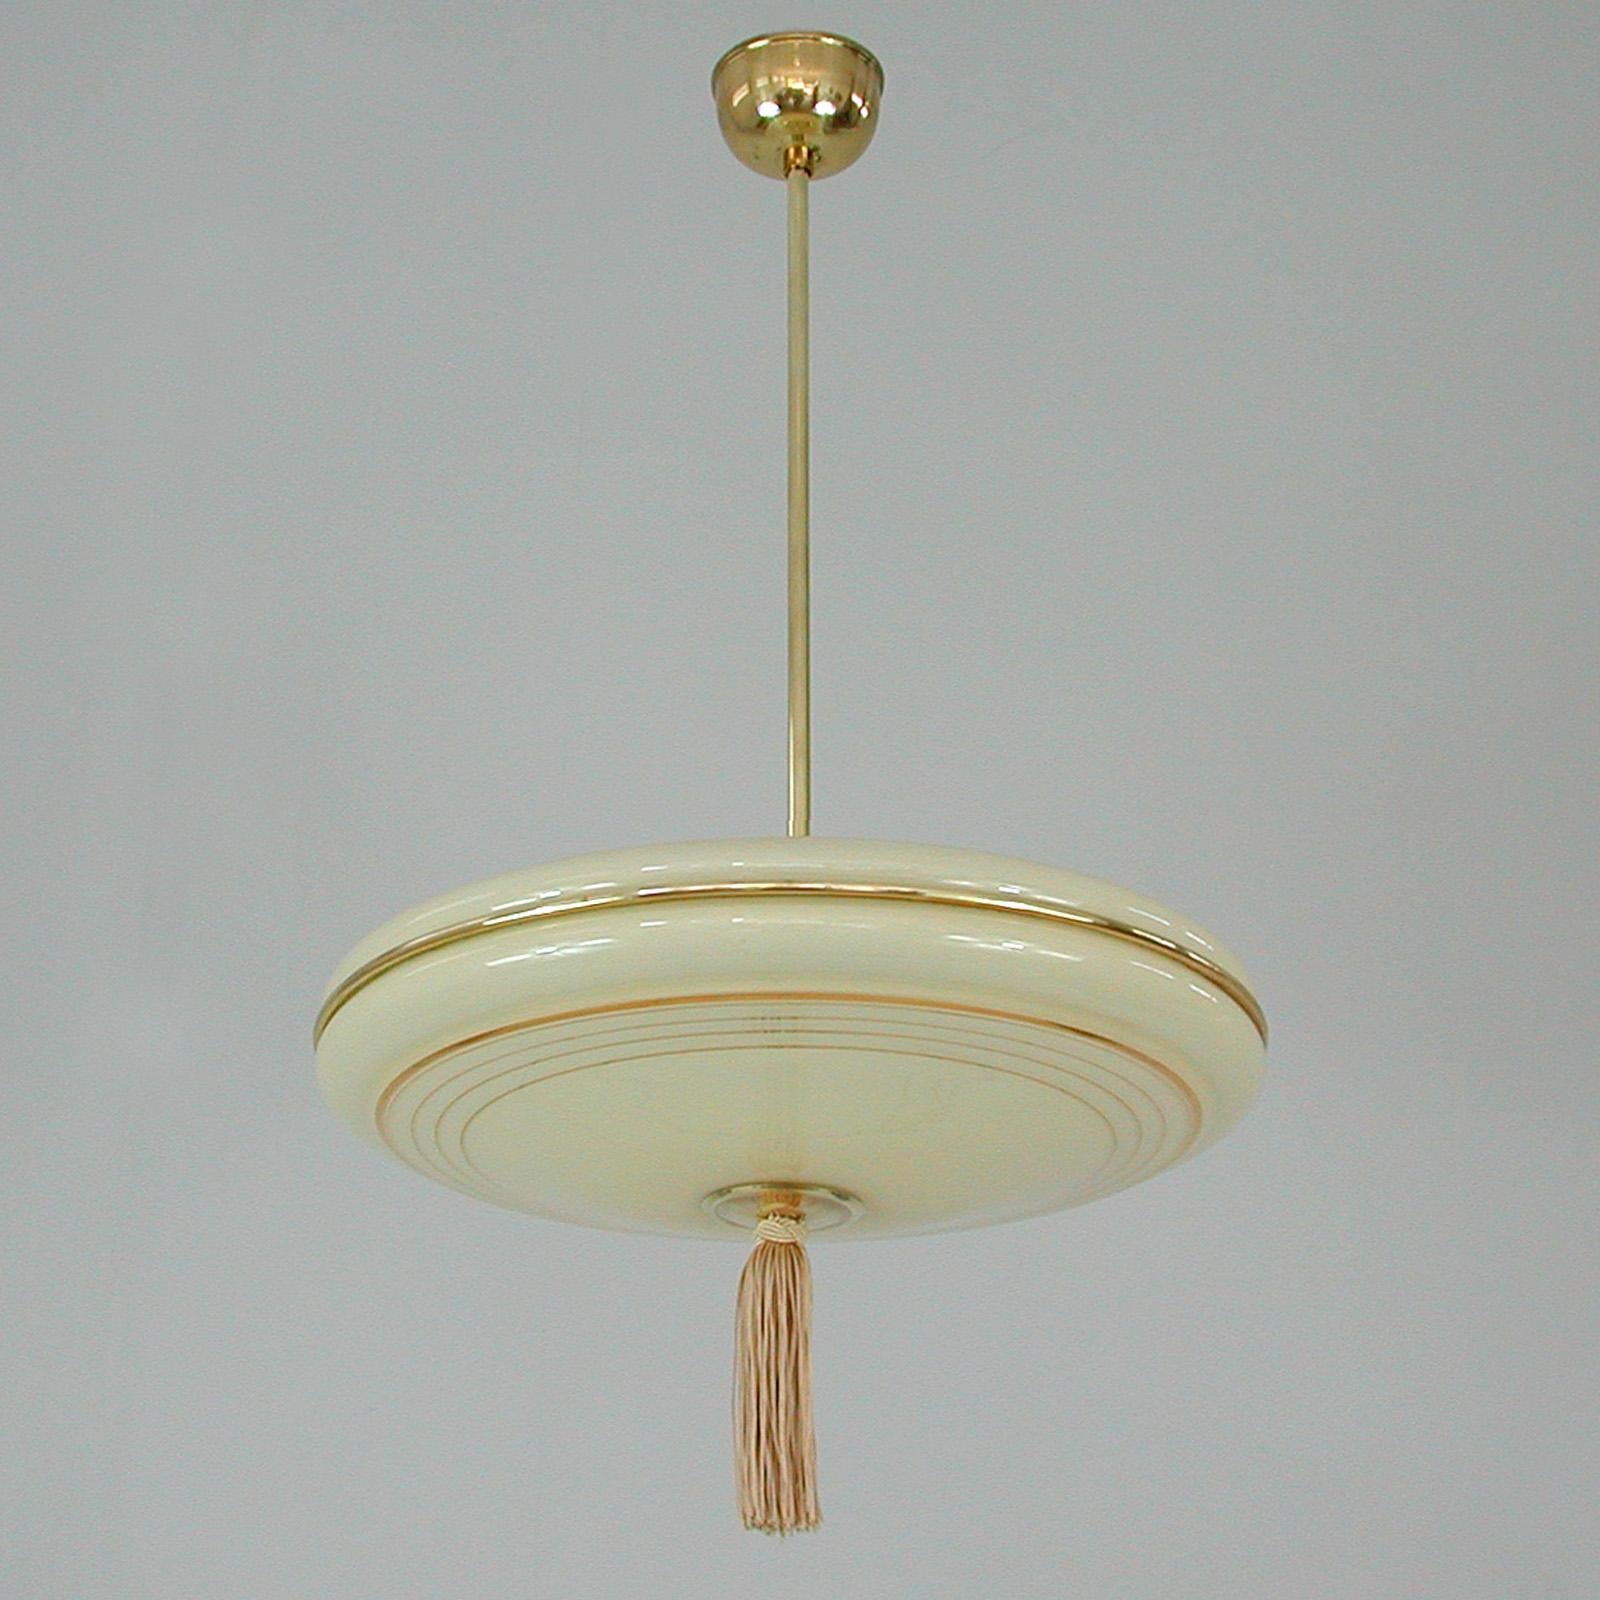 This elegant German pendant was designed and manufactured in Germany in the 1930s. The light features an ivory colored opaline glass lamp shade with gilt overlay decoration and brass hardware. This is a very typical Bauhaus Design. Very good vintage